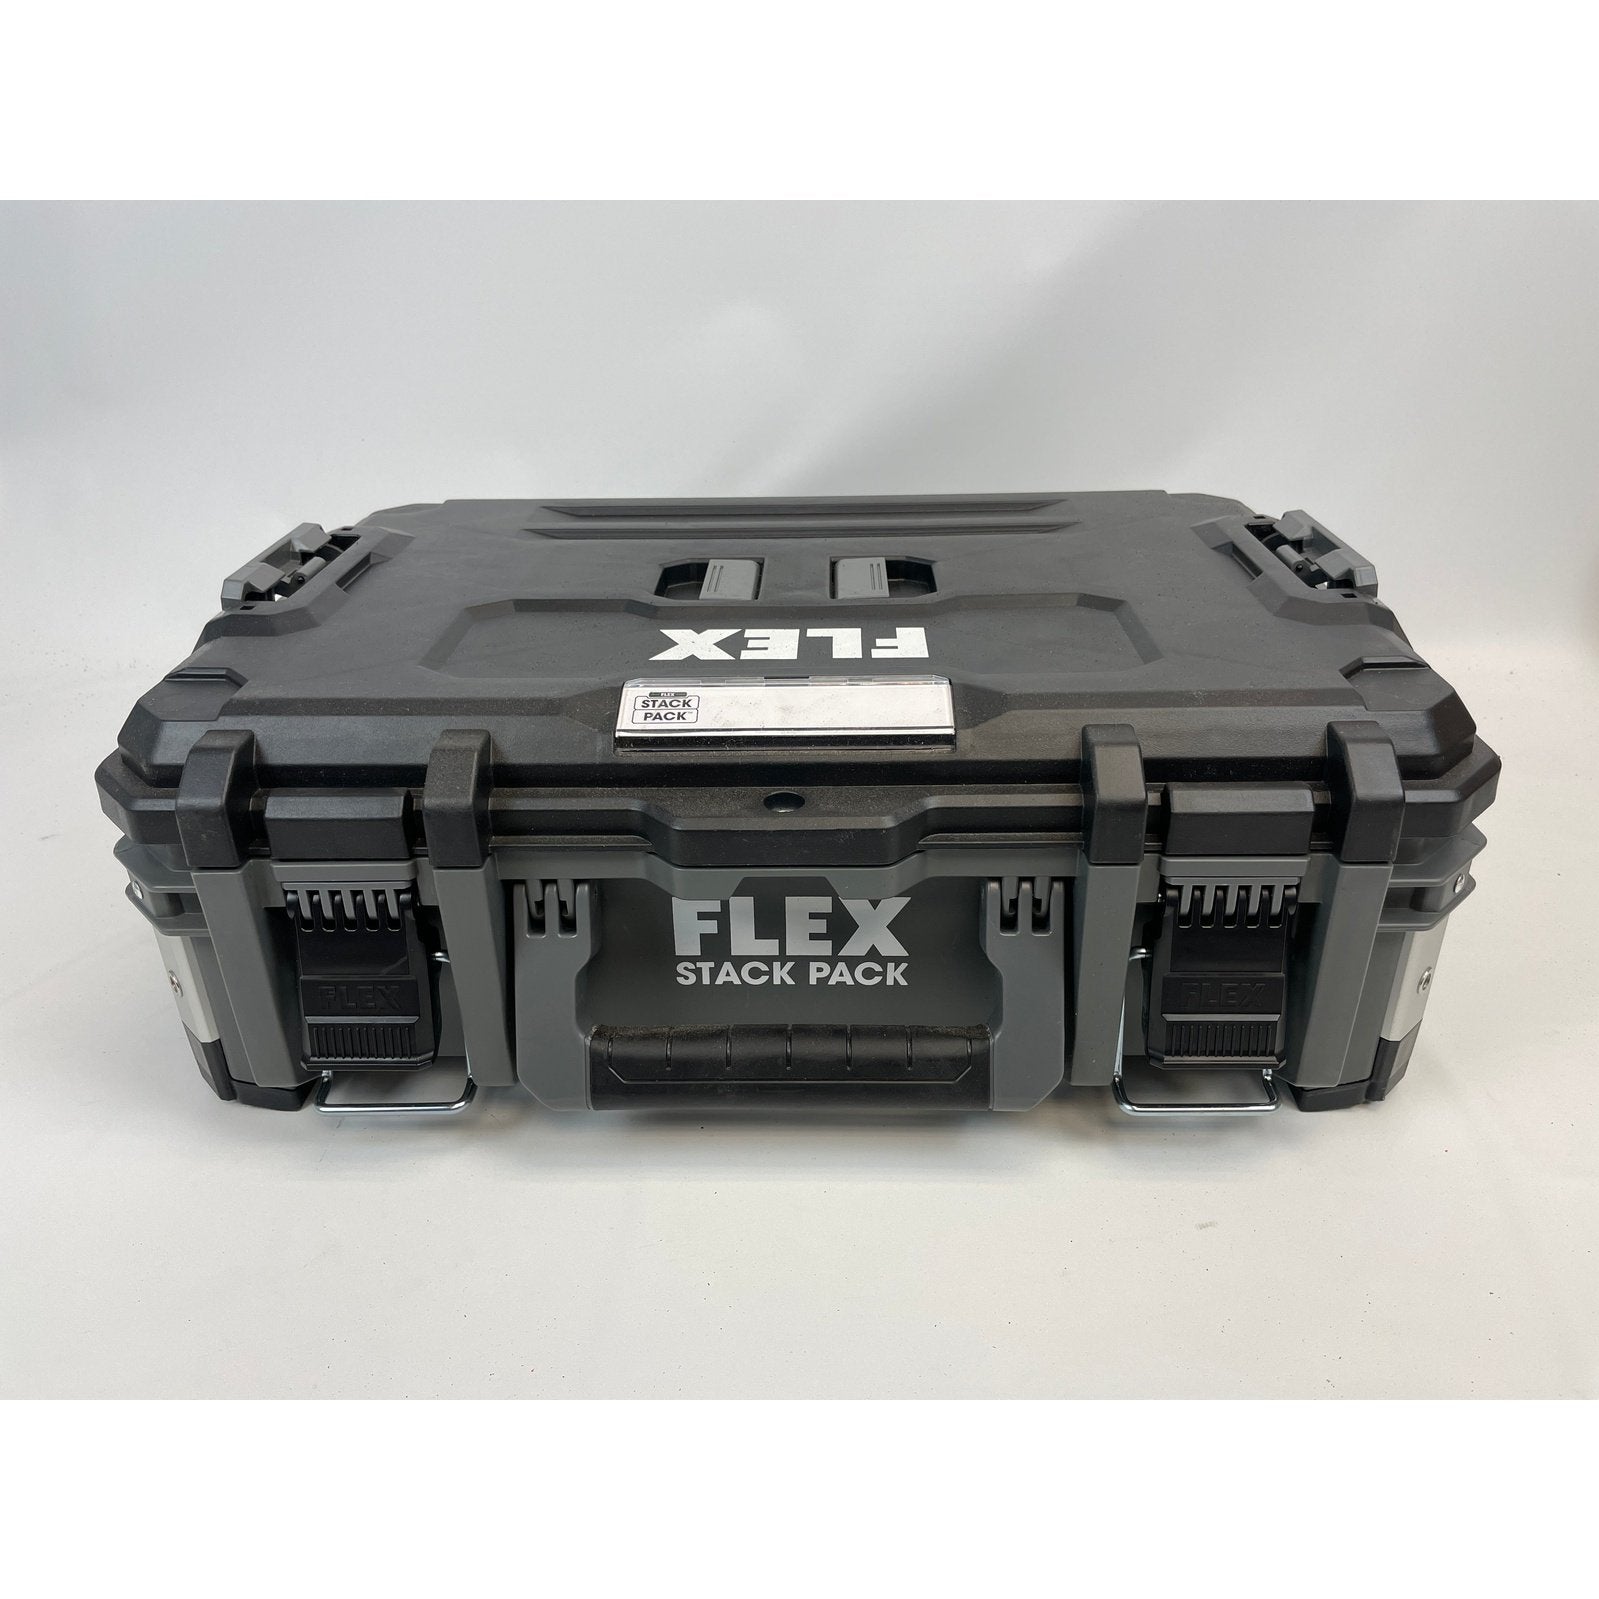 FLEX STACK PACK Attachments Kit